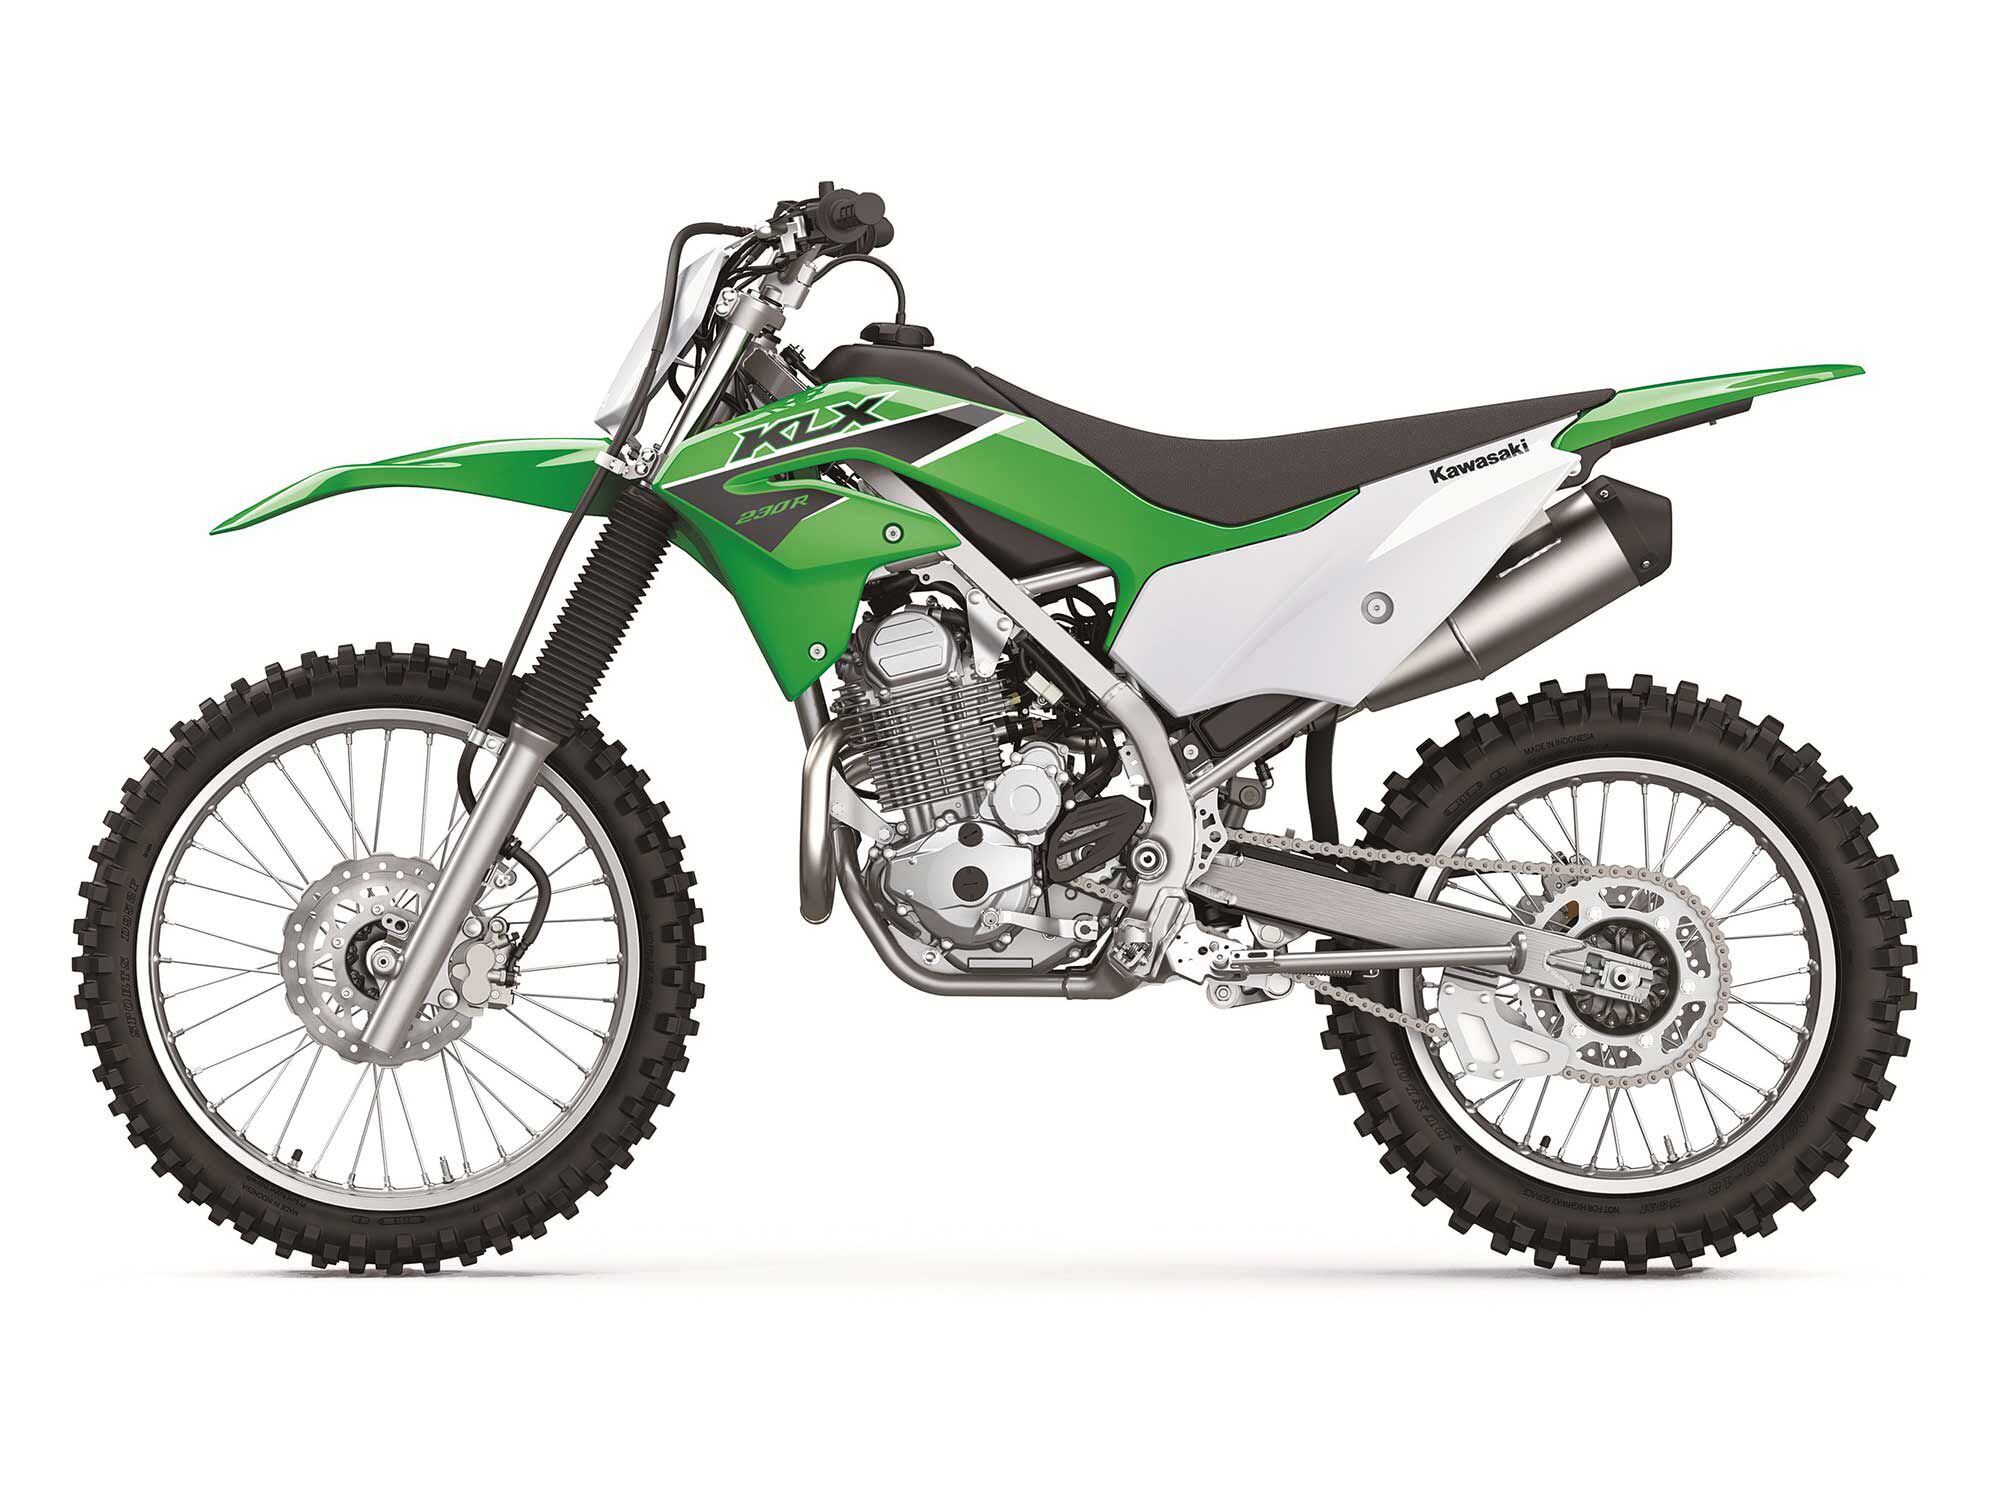 For those looking for a tamer version of the KLX300R, Kawasaki offers the KLX230R, which is also available in a shorter S version.